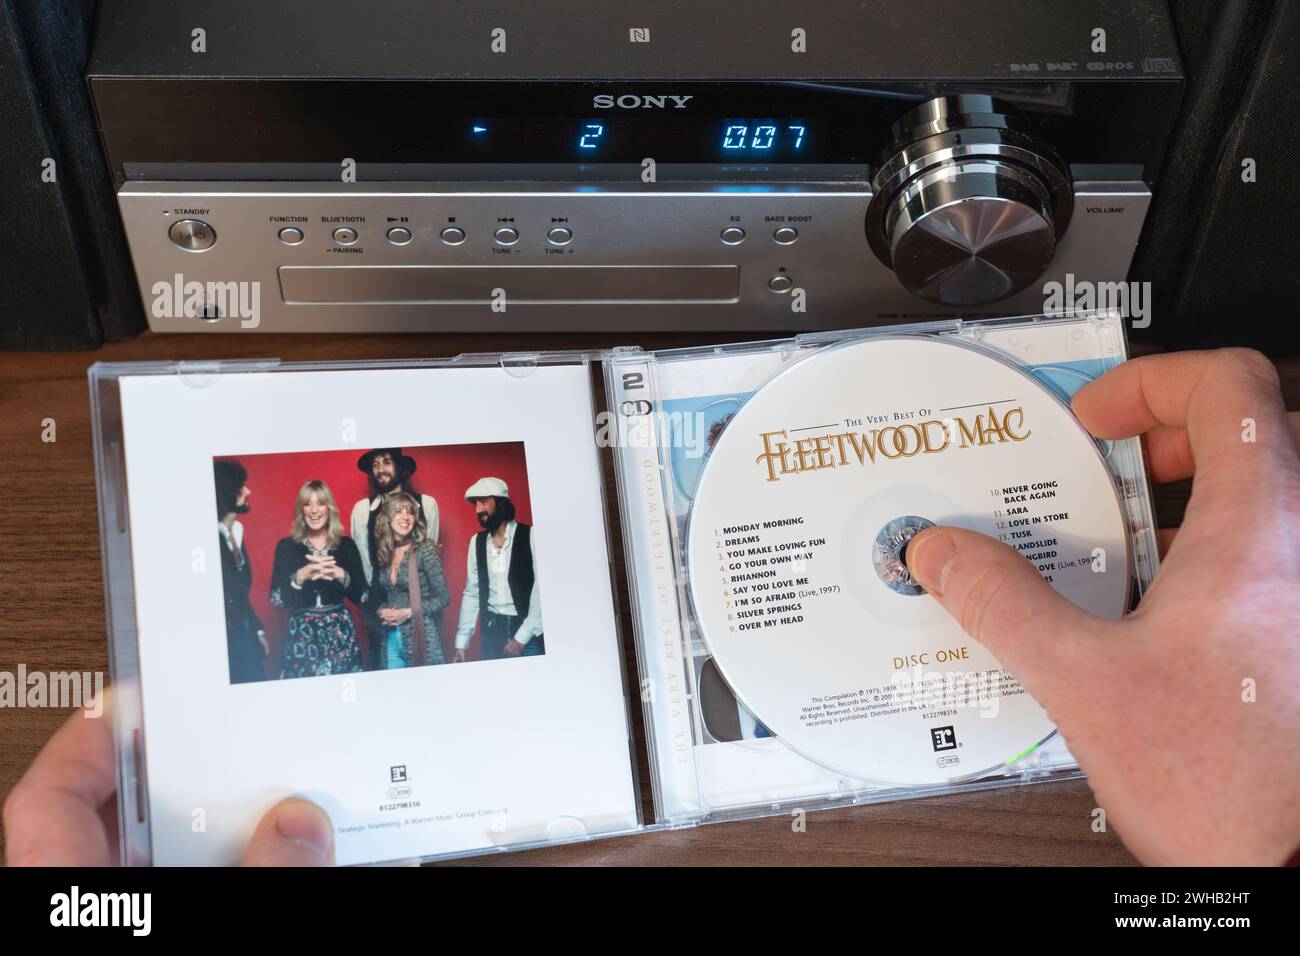 Double CD of The Very Best Of Fleetwood Mac showing the band members - a British American rock band formed in 1967. In front of a Sony CD player. UK Stock Photo